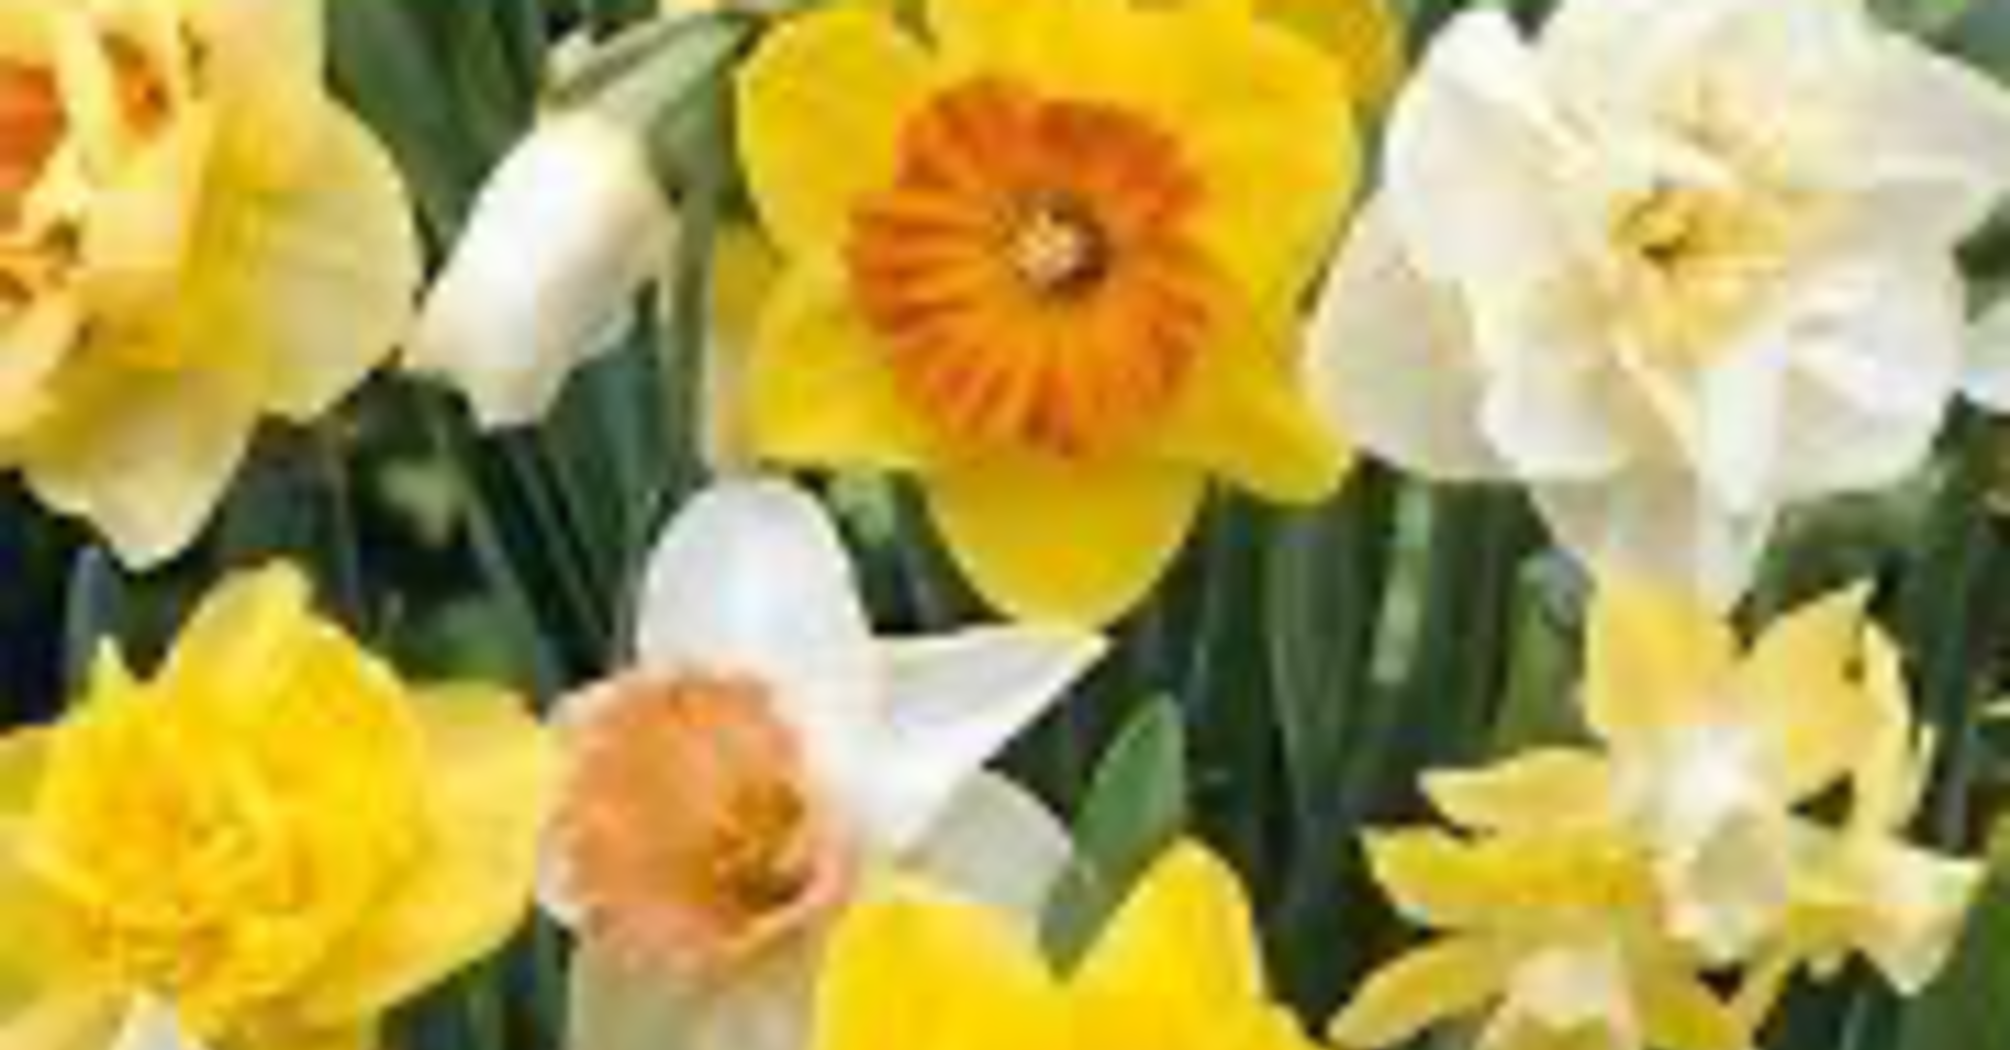 Wood ash and organic fertilizers: top 4 ways to care for daffodils in spring